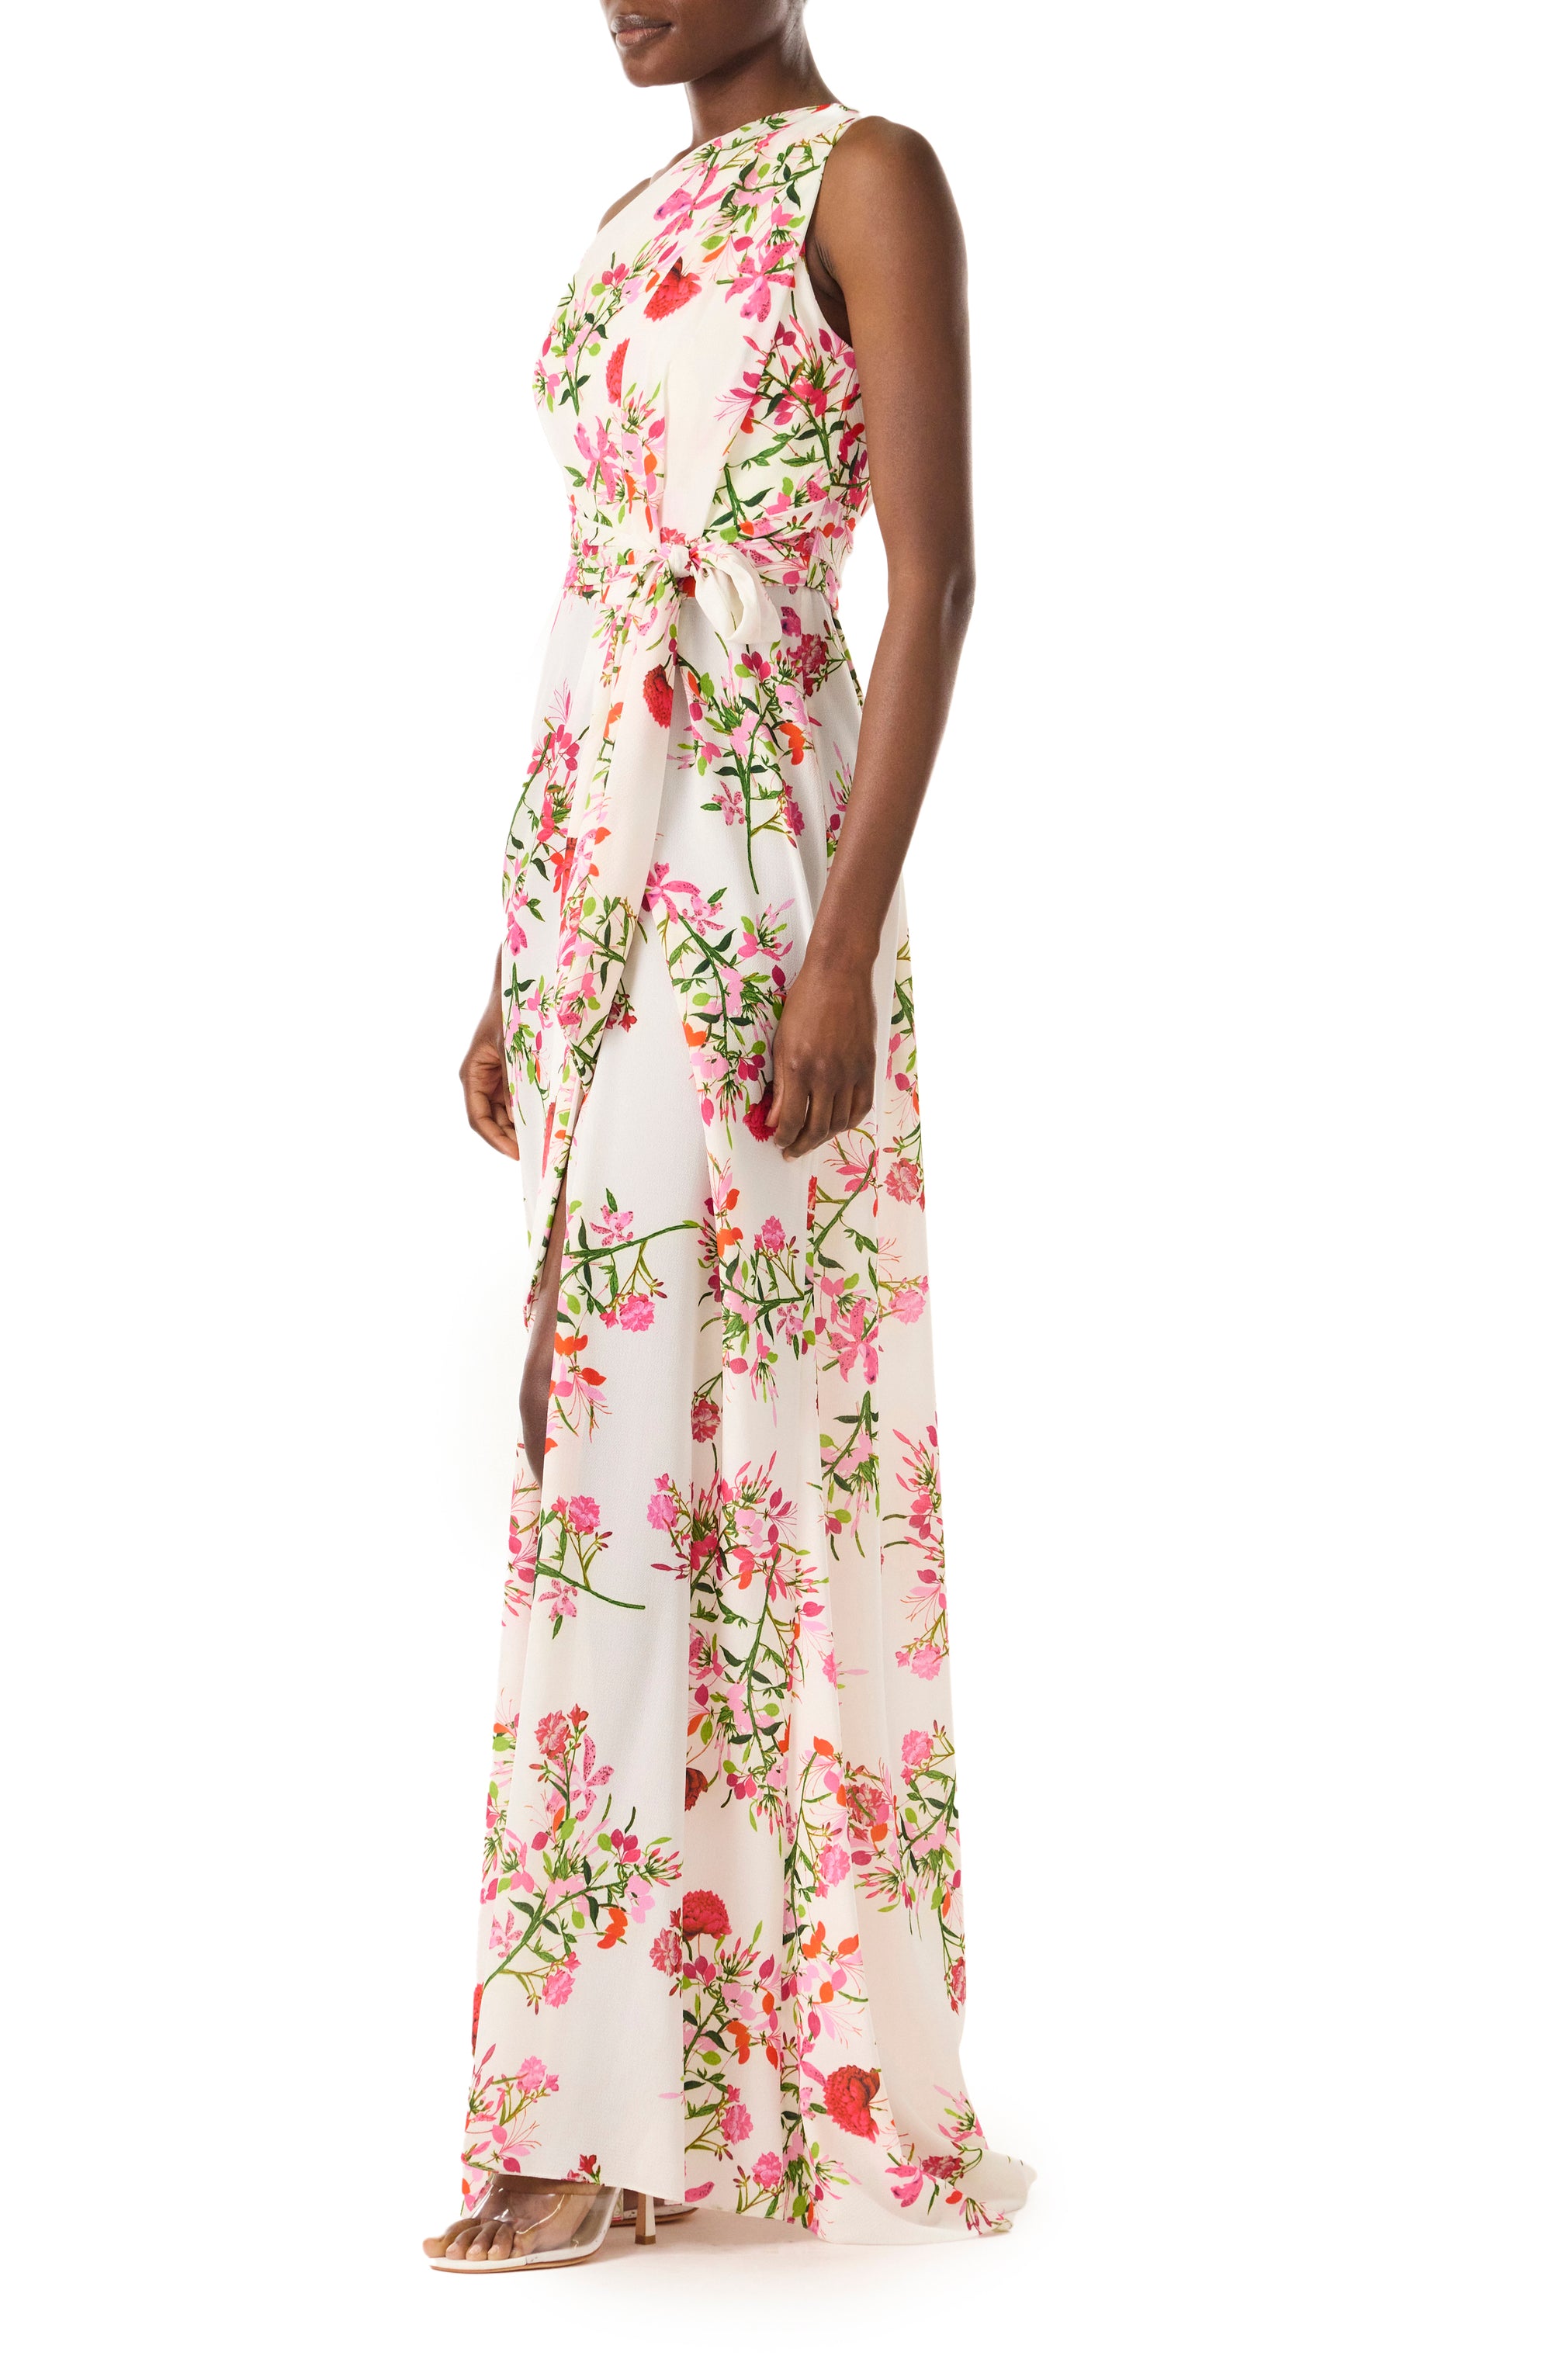 Monique Lhuillier One shoulder draped gown with self-tie belt and high front slit in Silk White Fuchsia floral printed crepe - side.